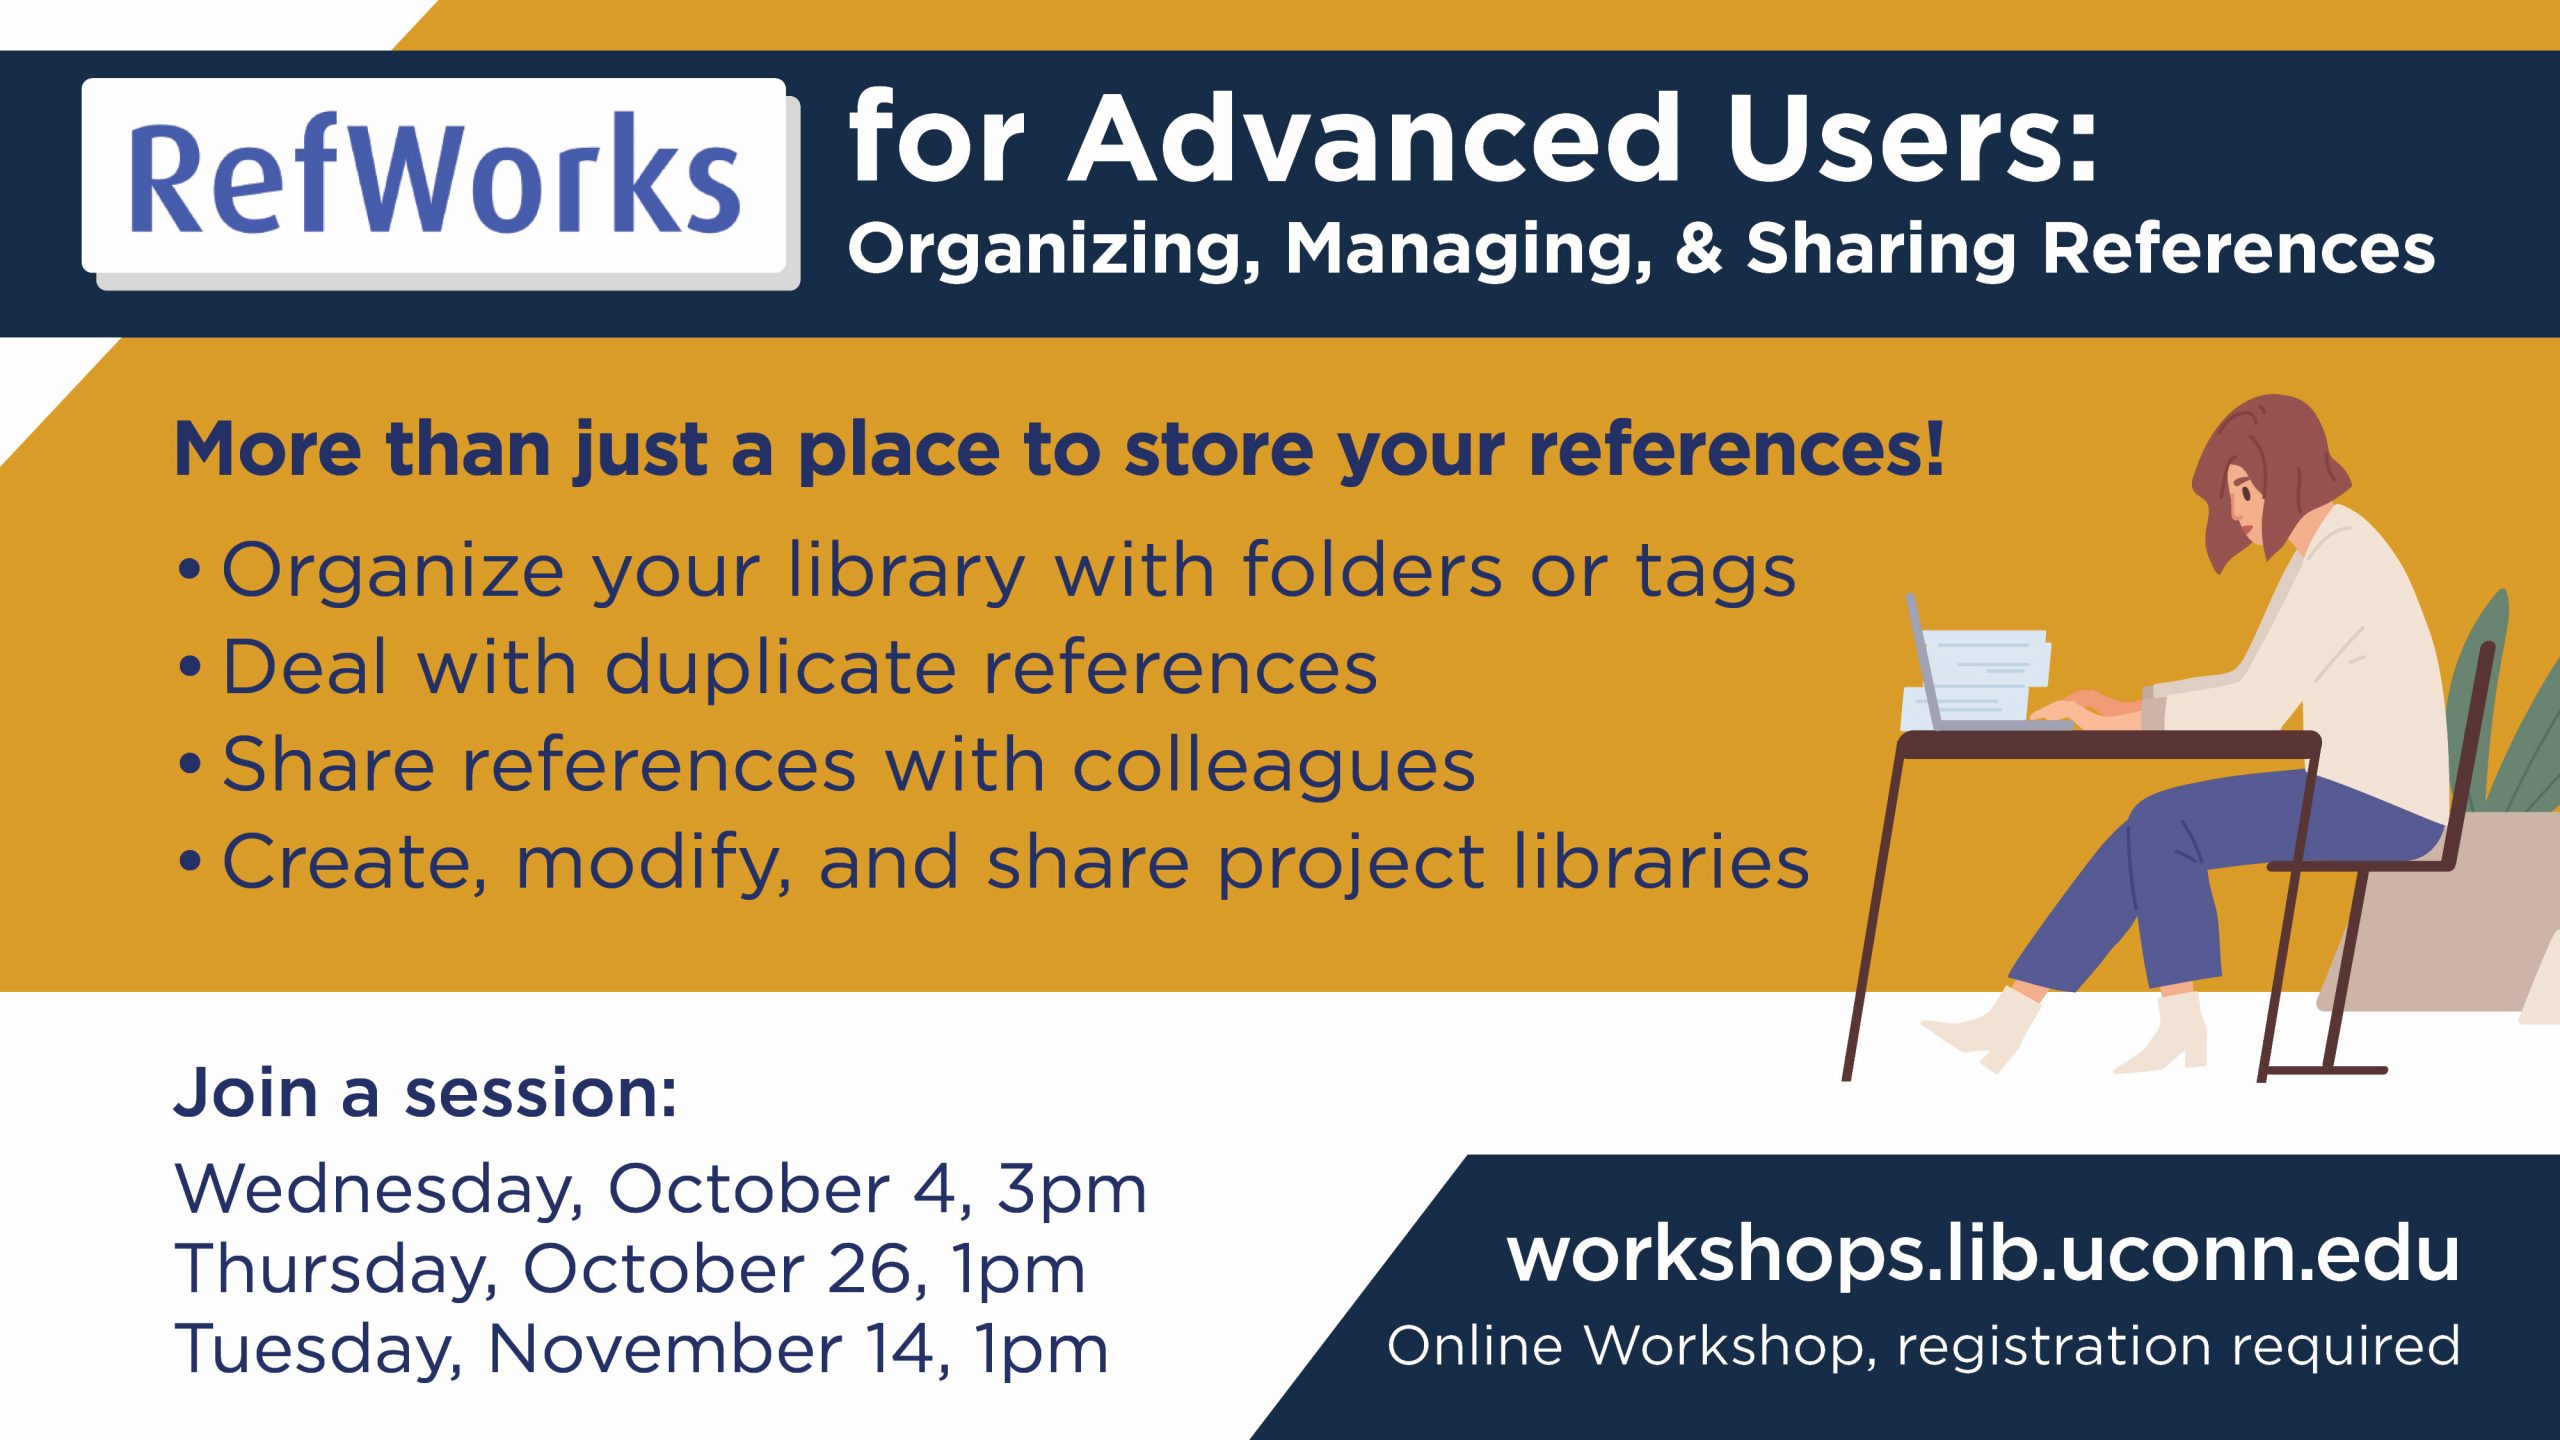 RefWorks for Advanced Users: Organizing, Managing and Sharing References. Sign up for a session at http://s.uconn.edu/CitationManagement